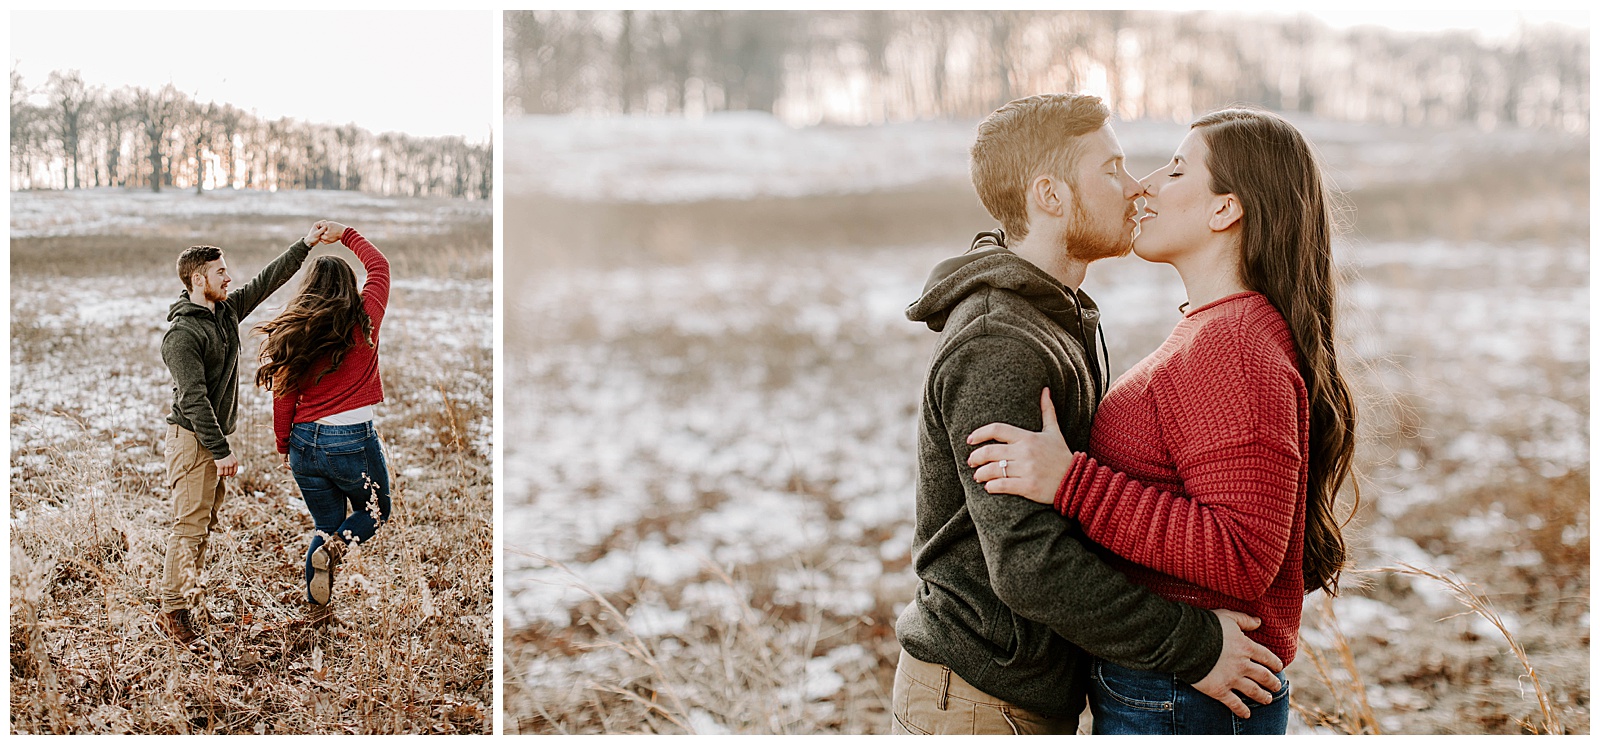 Arielle + John | Valley Forge Engagement